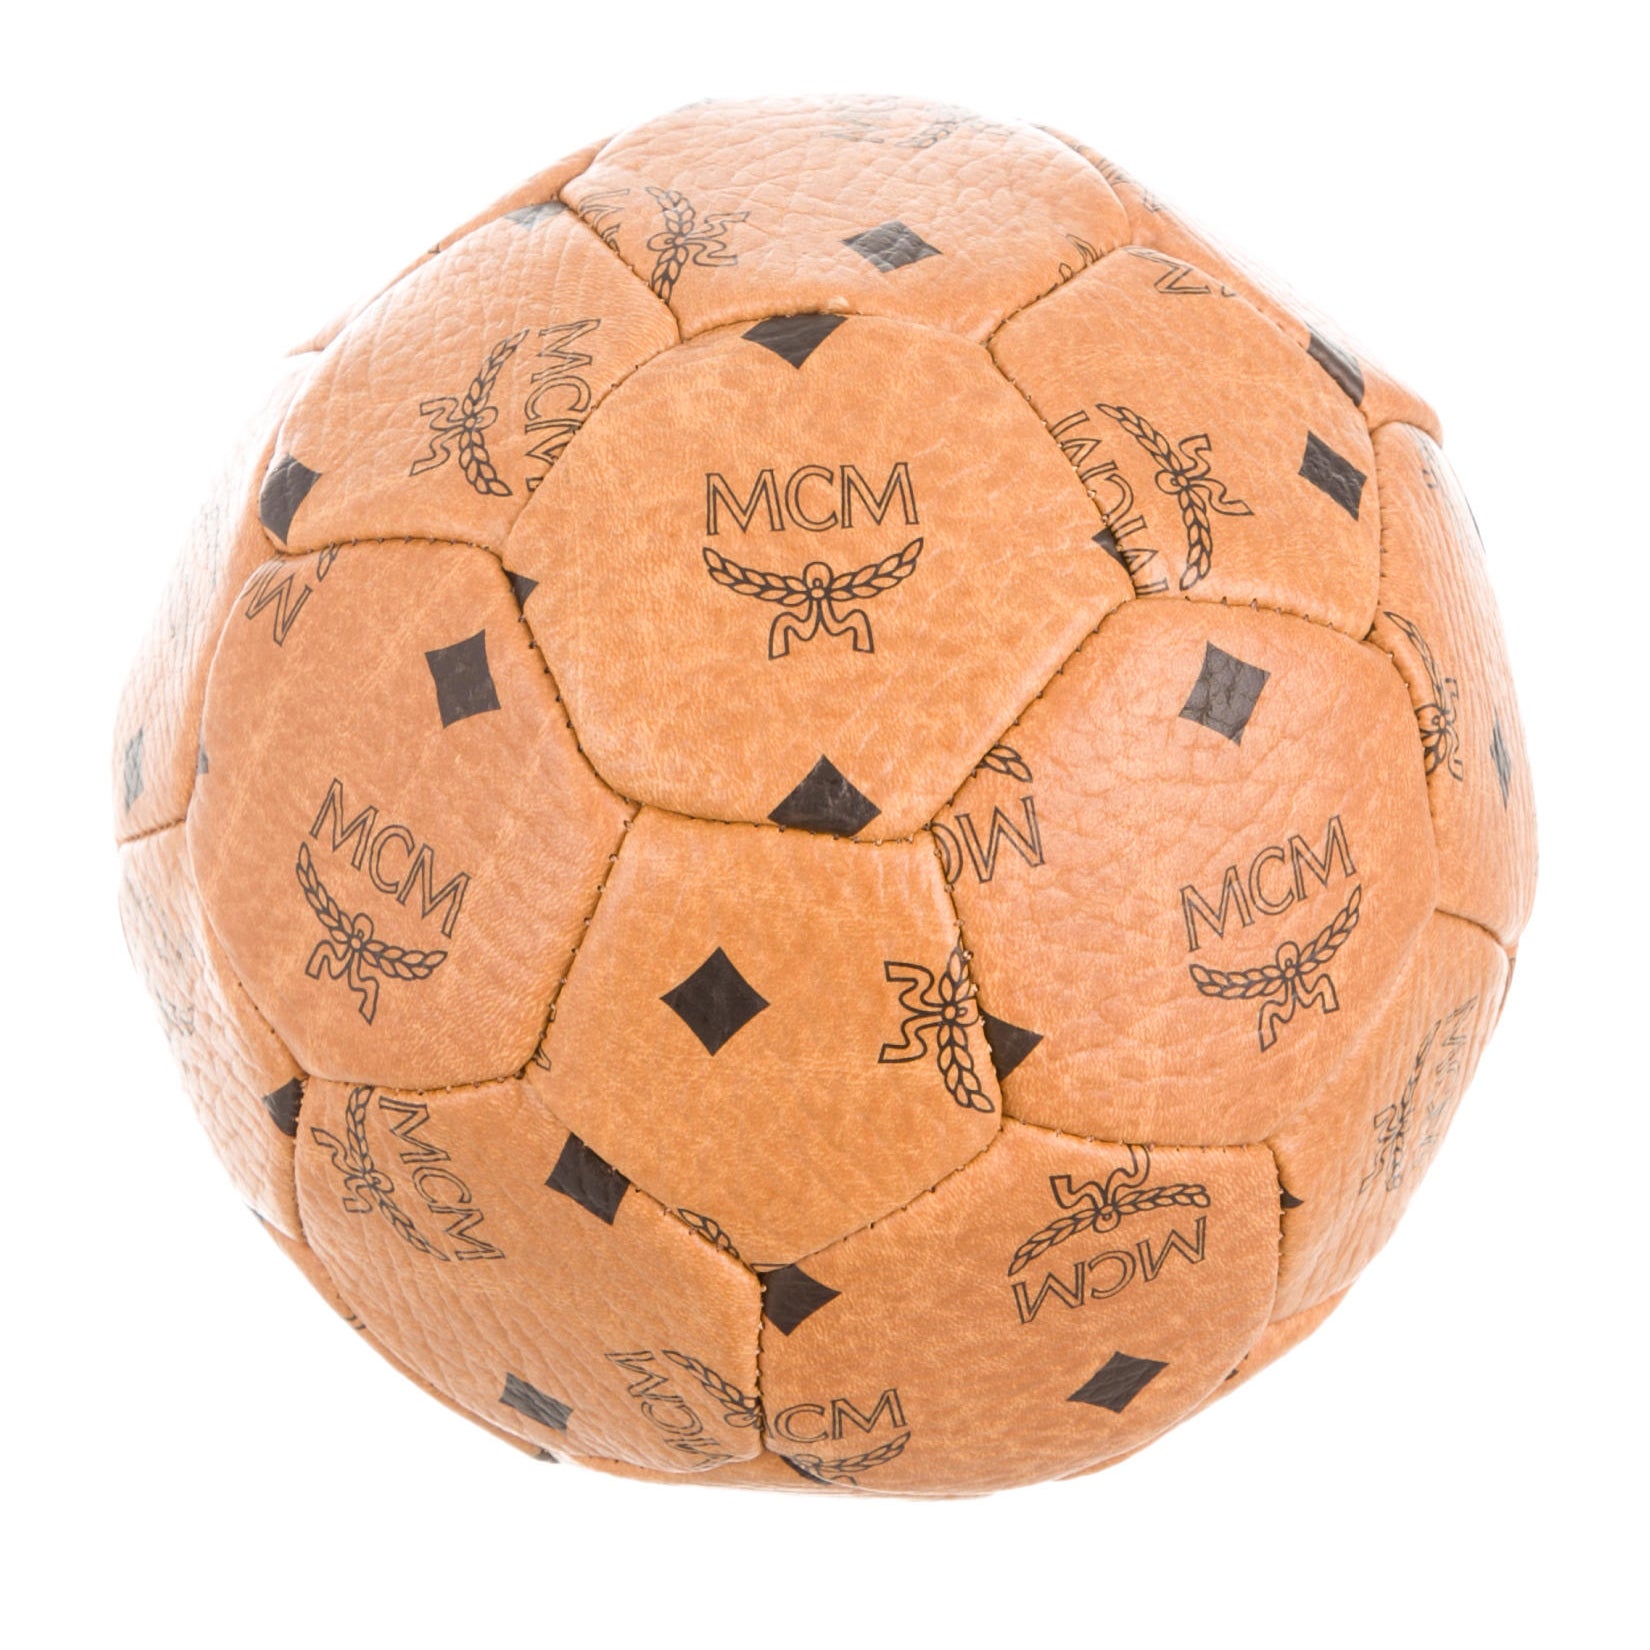 Louis Vuitton 1998 Pre-owned Monogram World Cup Memory Soccer Ball - Brown